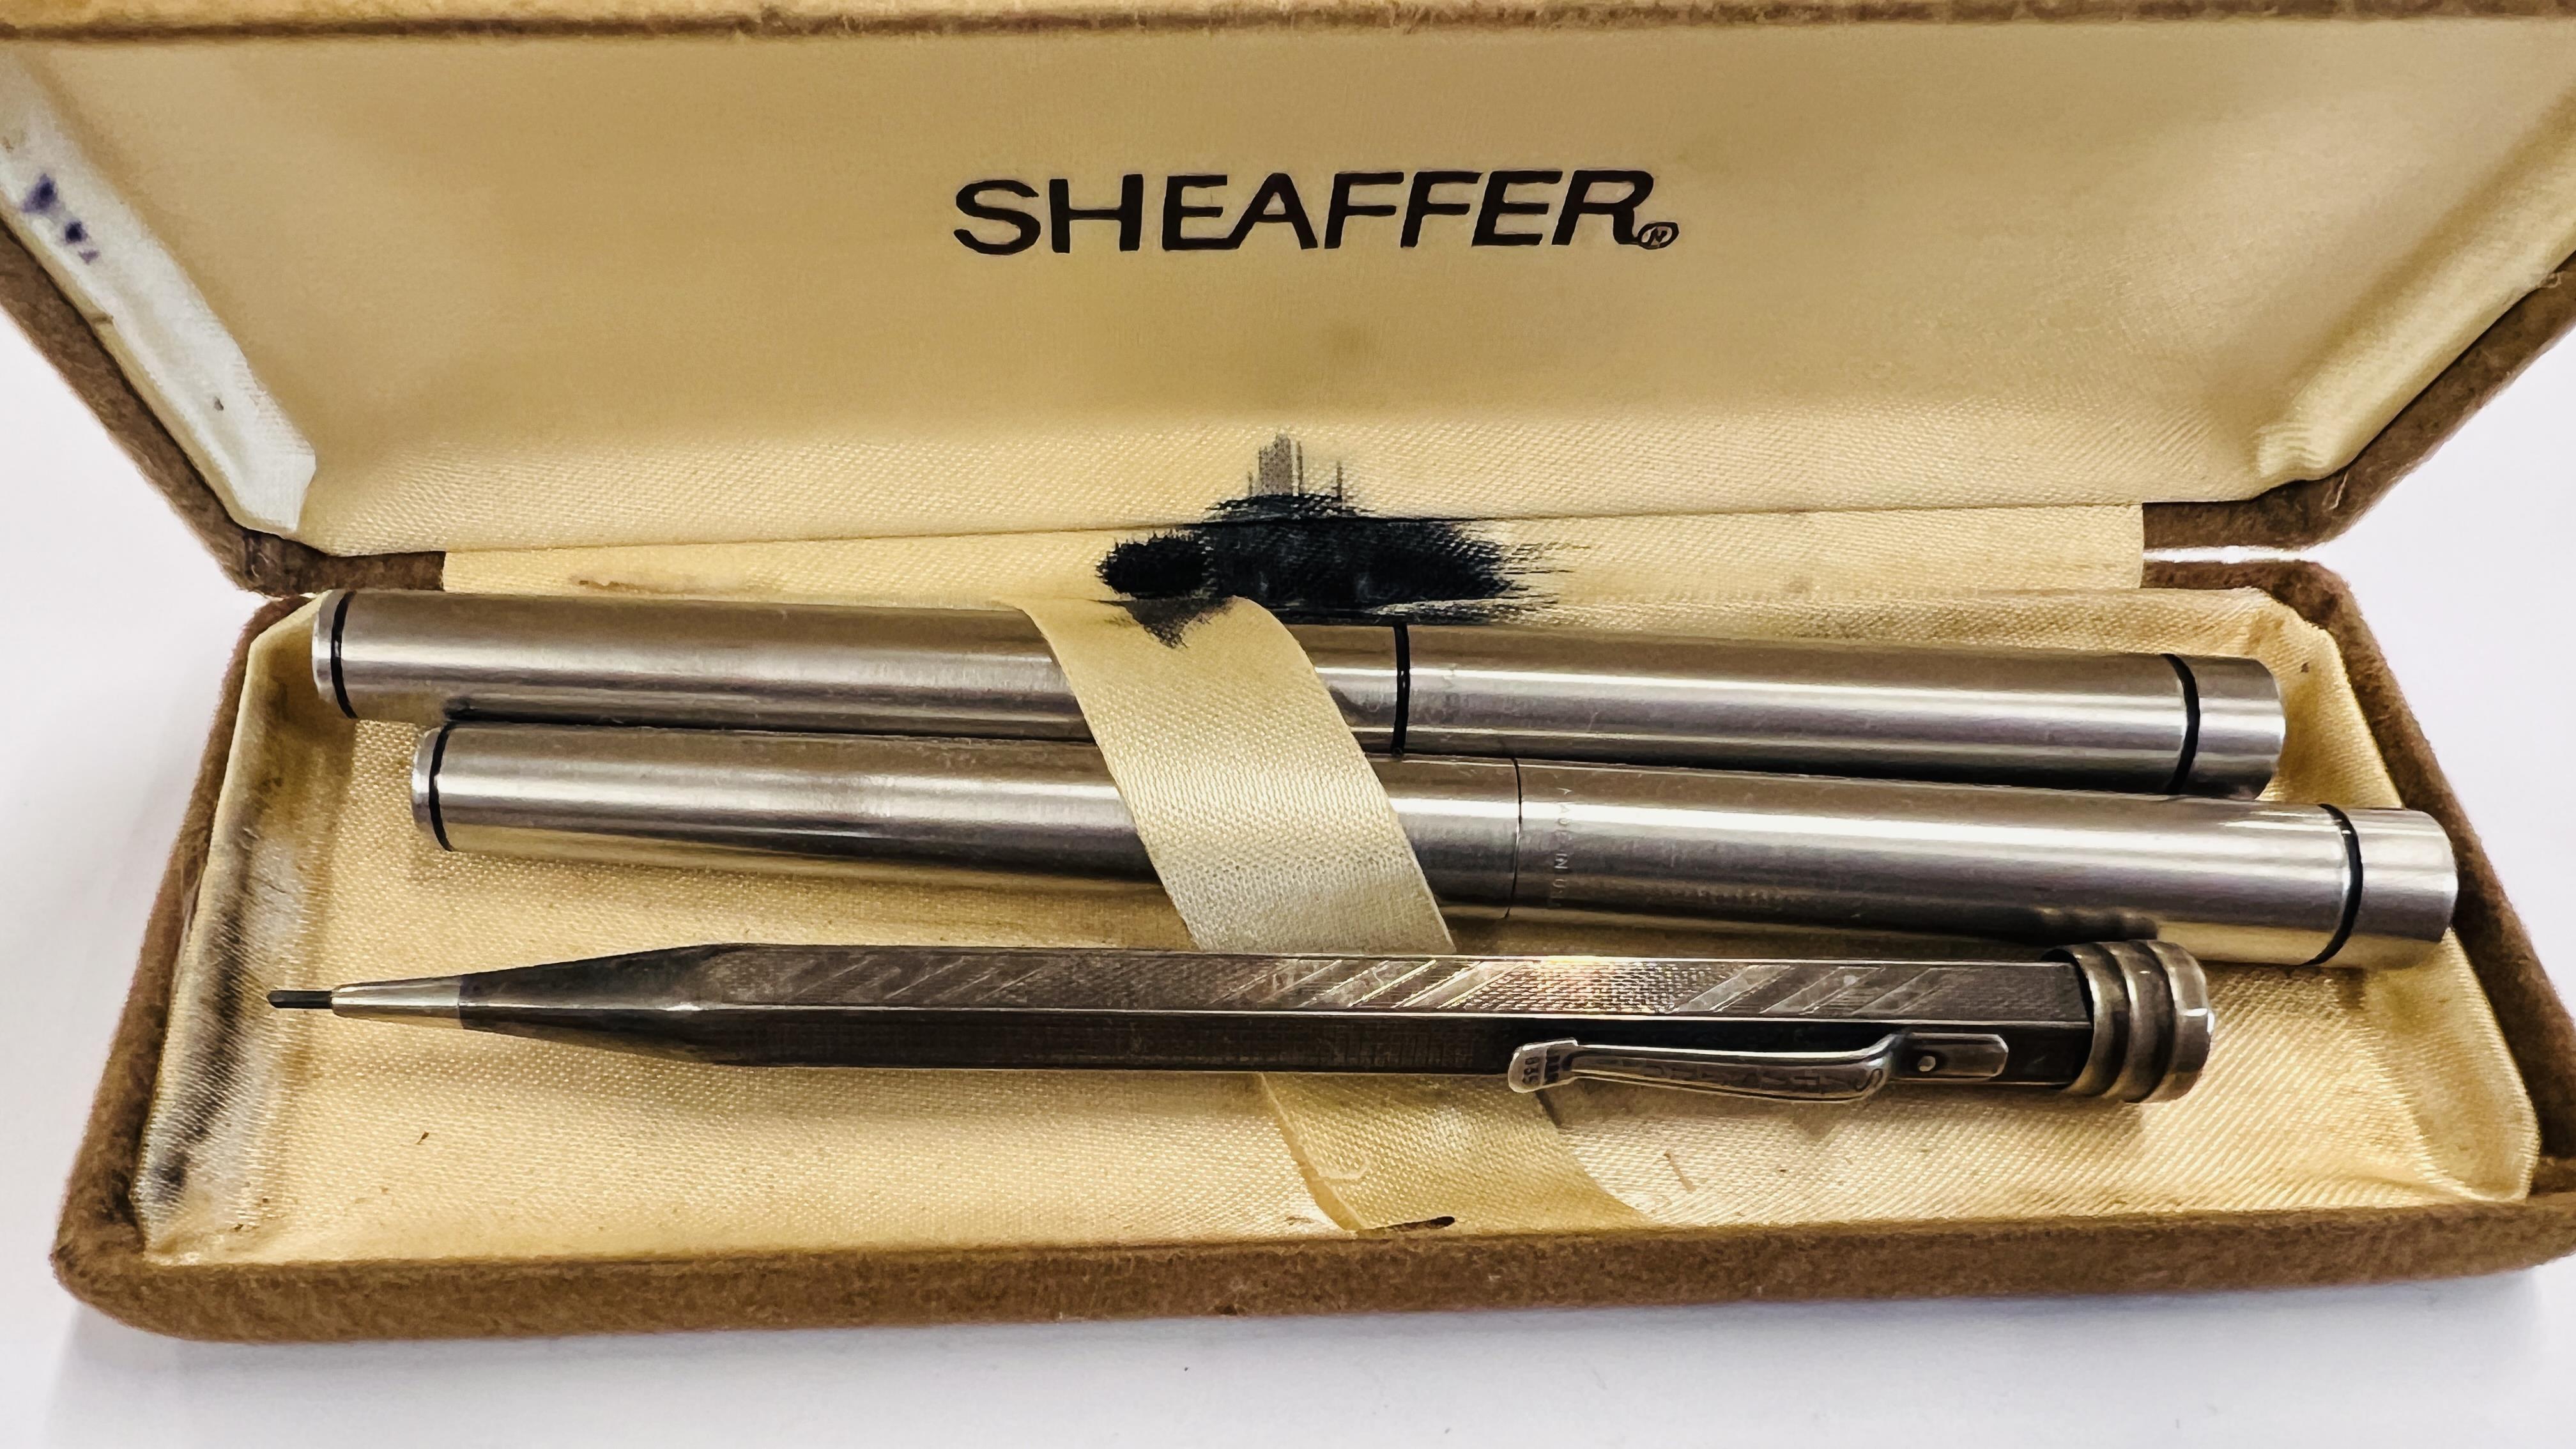 TWO SHEAFFER FOUNTAIN PENS AND BOX ALONG WITH A VINTAGE PROPELLING PENCIL MARKED "SARASTRO" 835. - Image 2 of 4